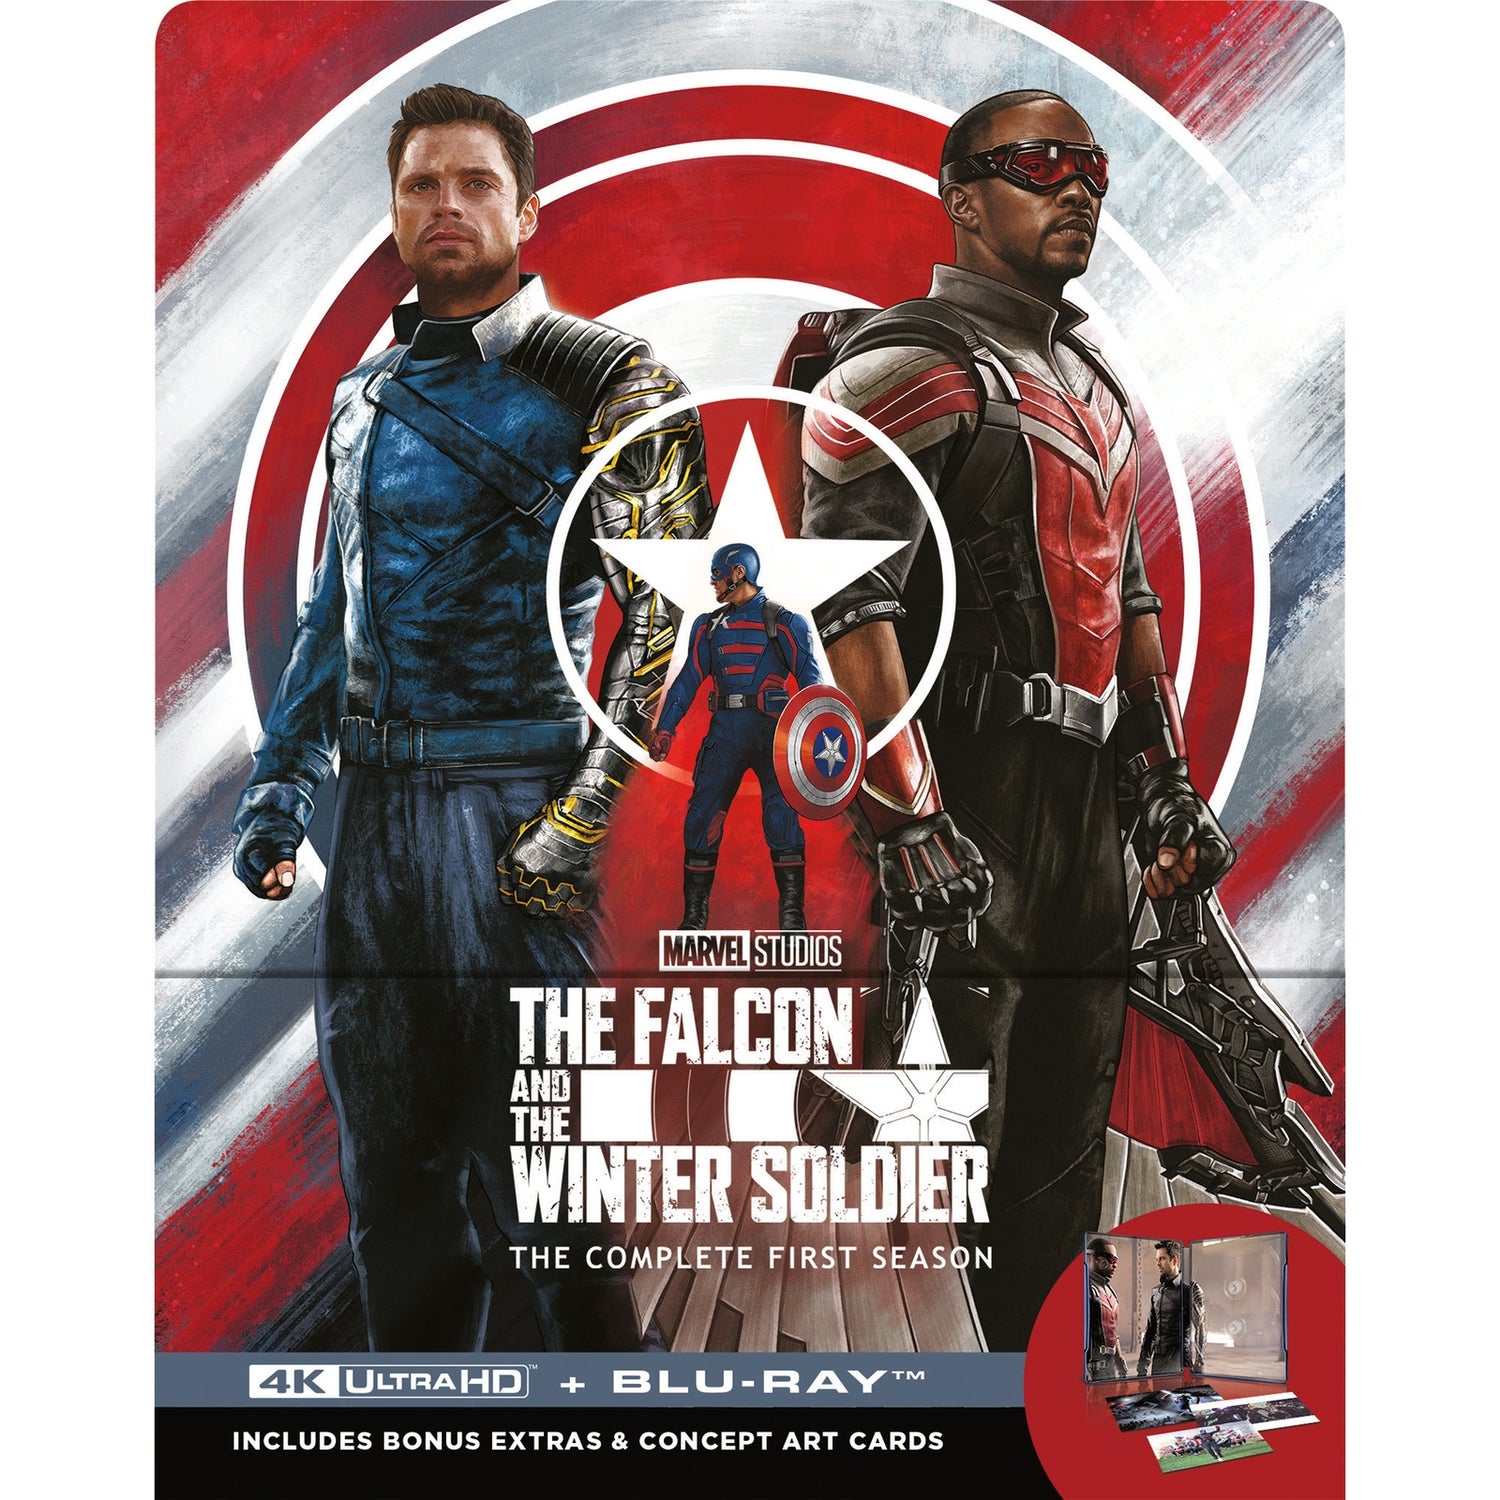 Marvel's The Falcon and The Winter Soldier SteelBook 4K Ultra HD & Blu-ray (Disney+ Original includes ArtCards)